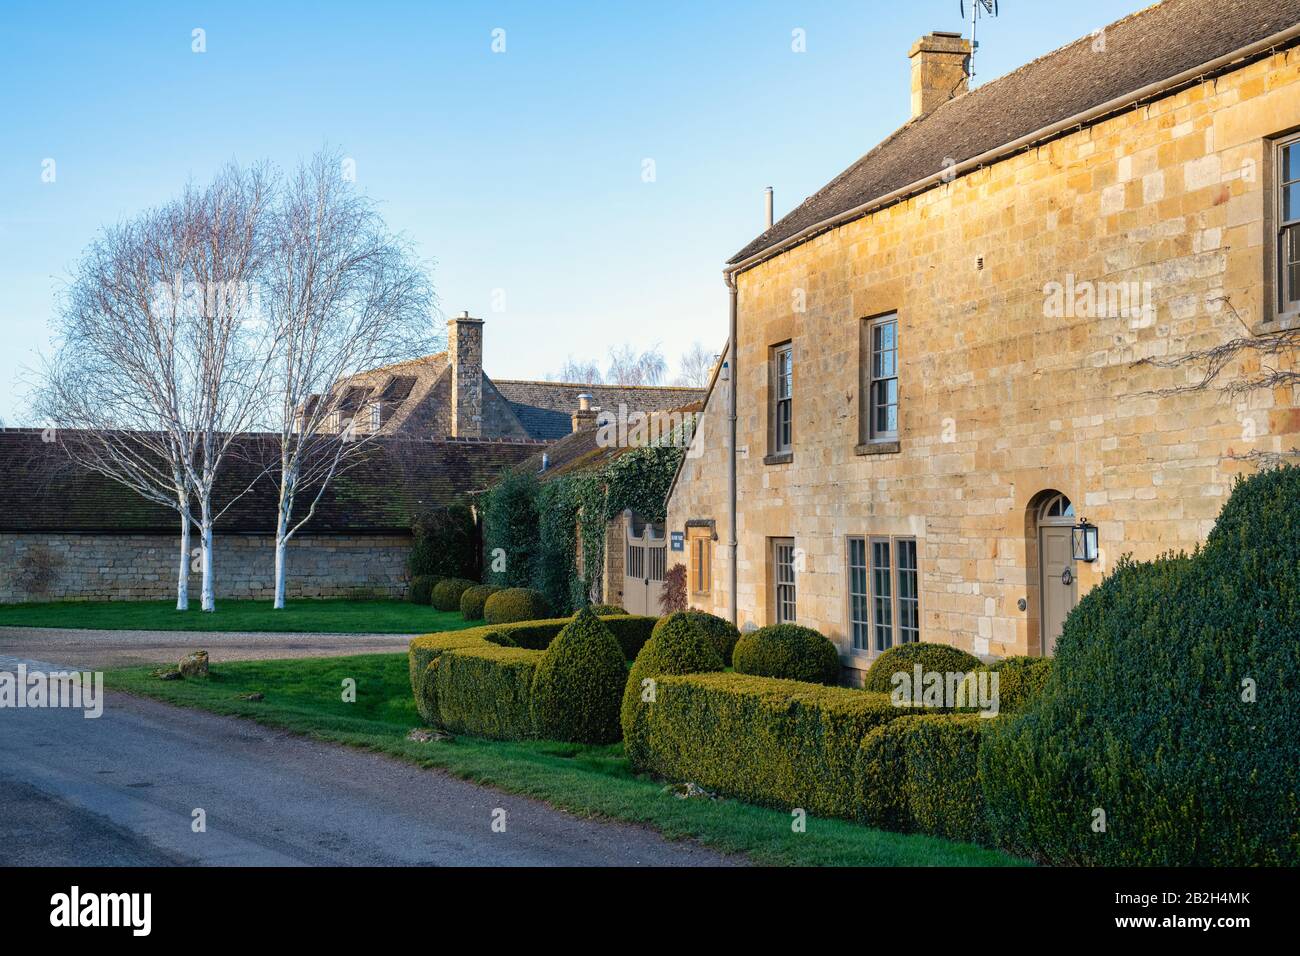 Manor farm house in the afternoon winter sunlight. Broadway, Cotswolds, Worcestershire, England Stock Photo